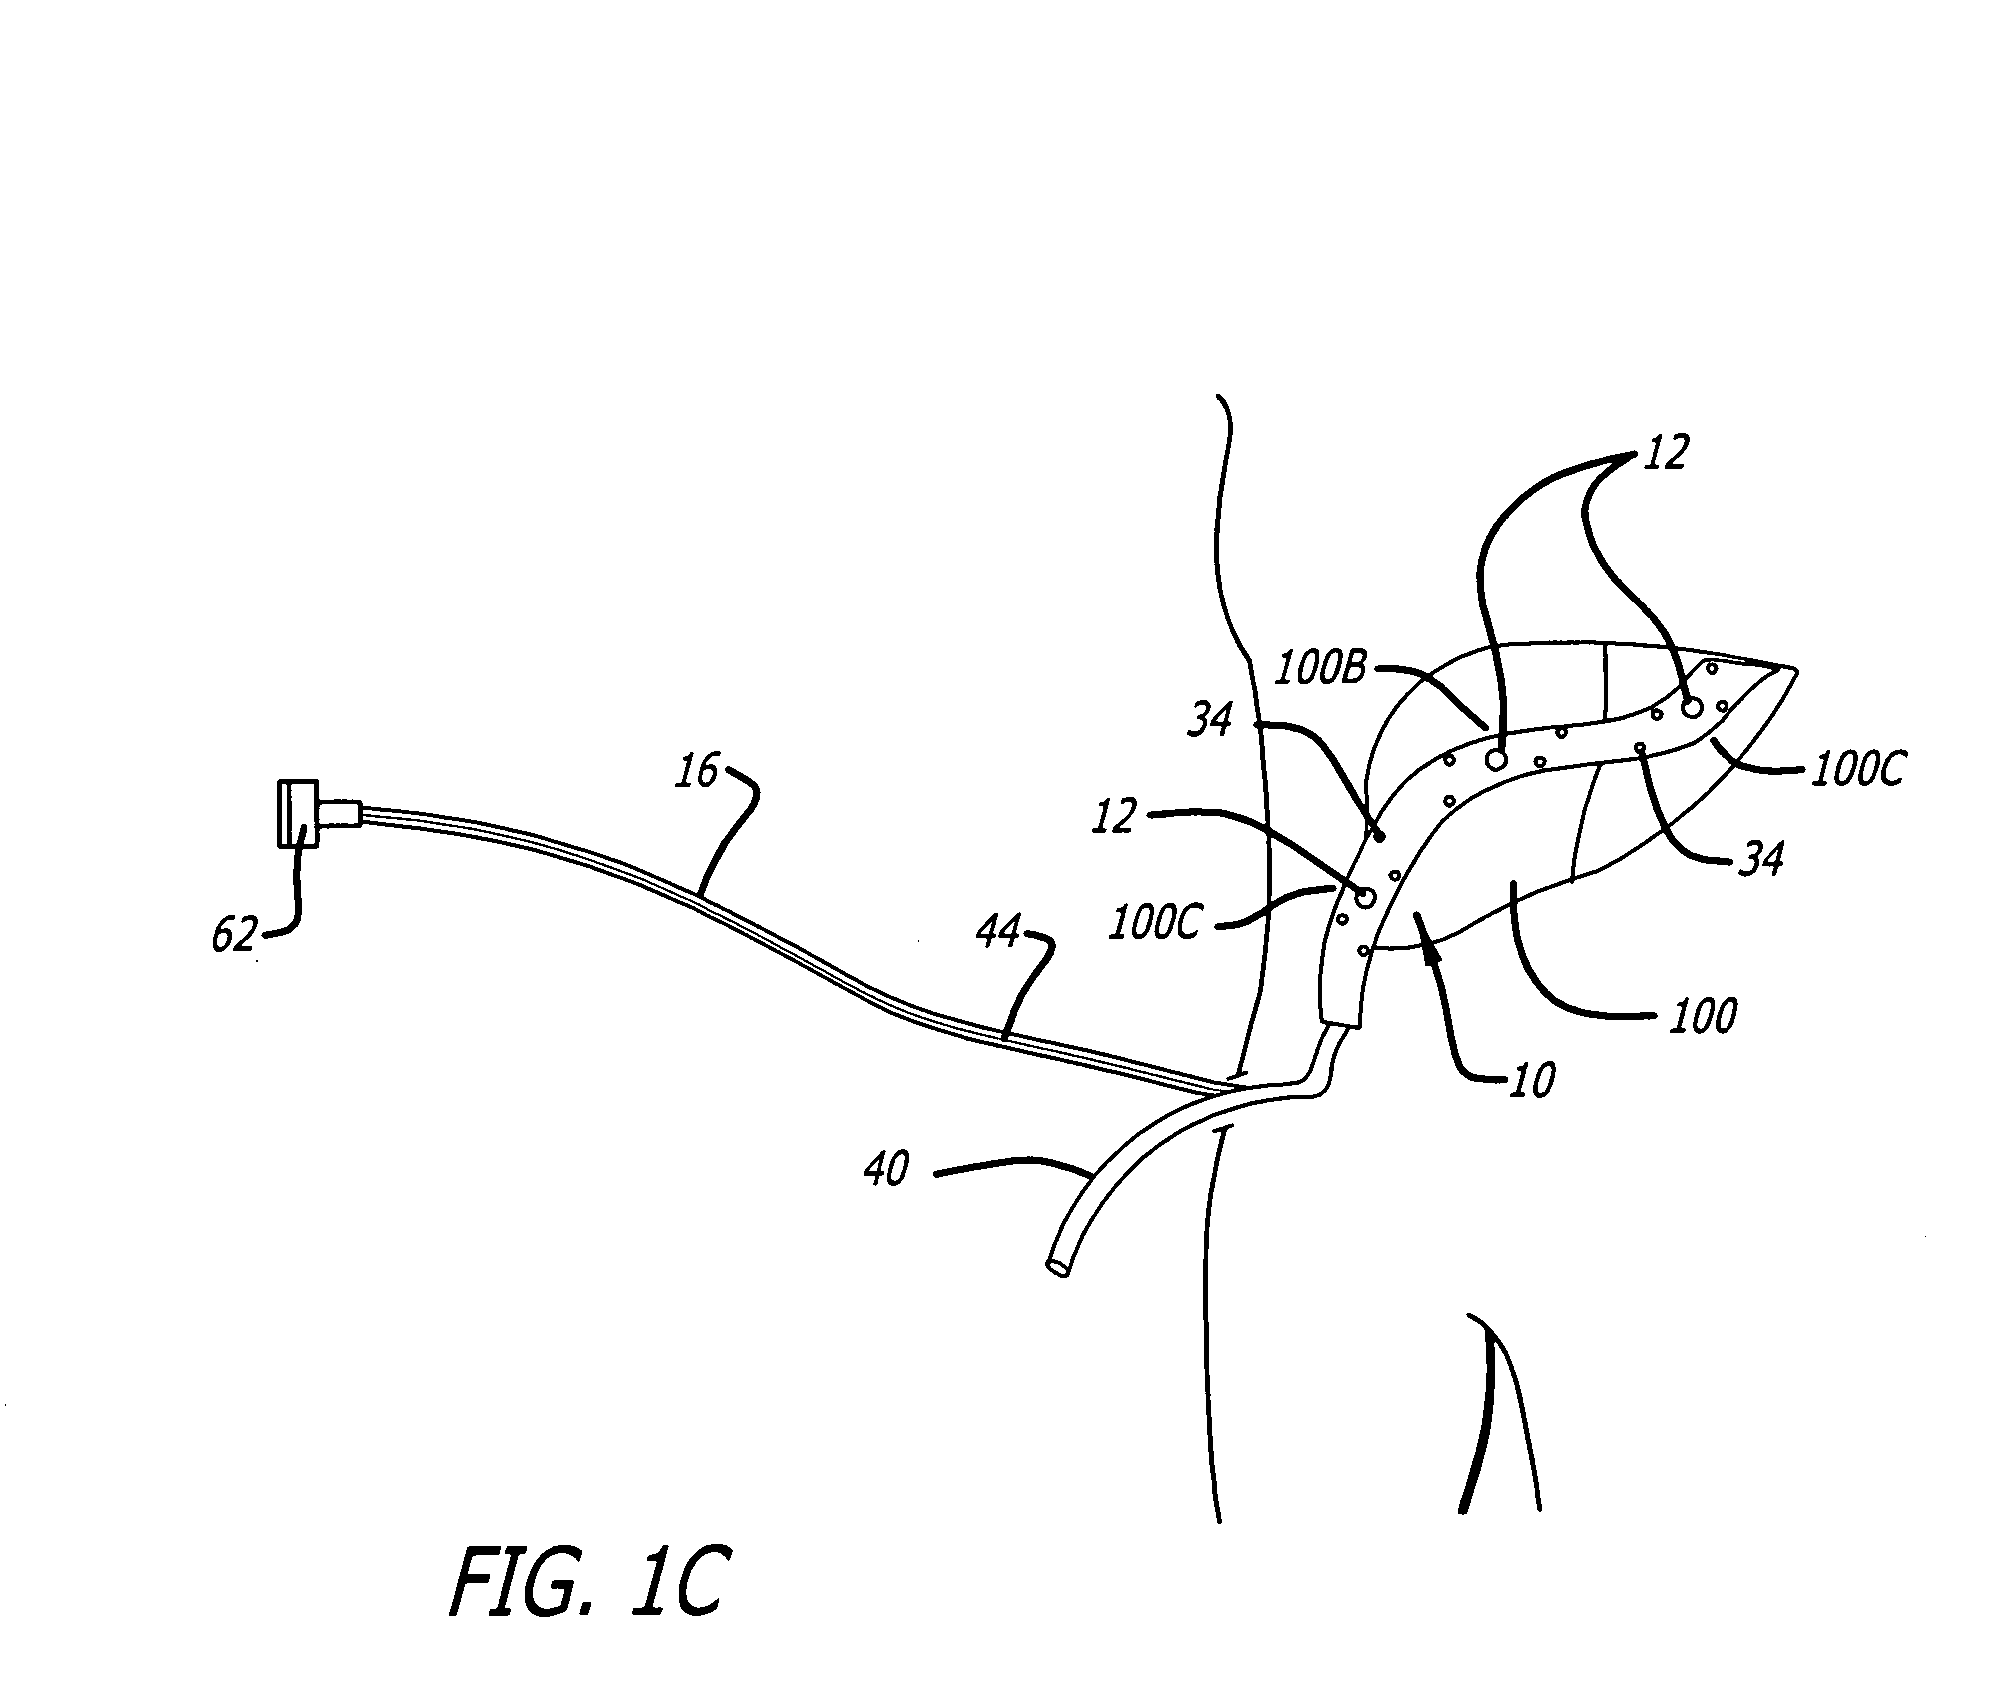 Surgical drain with positioning and protective features